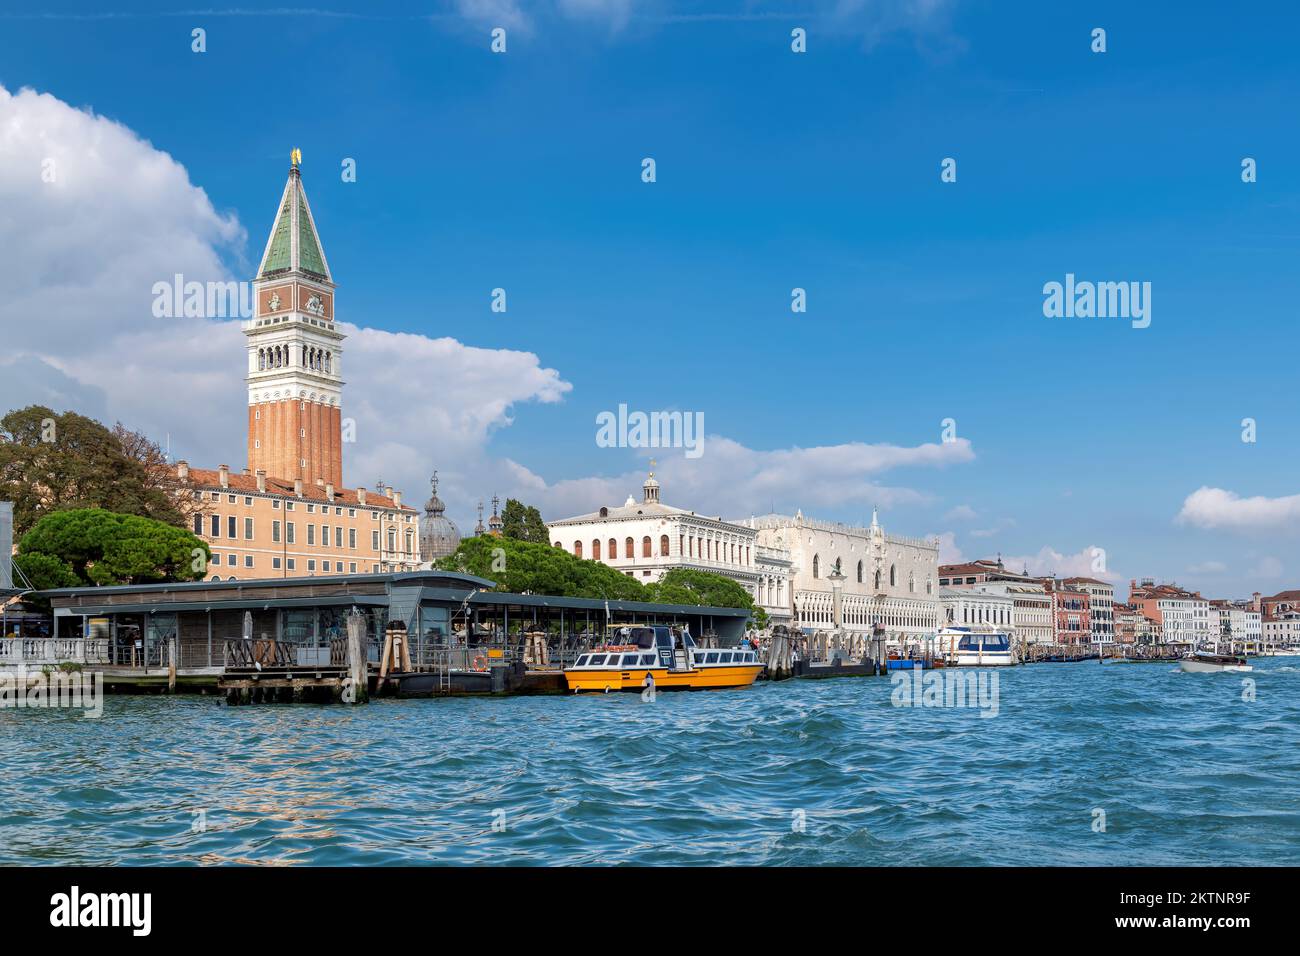 Venice skyline. Grand canal - Piazza San Marco with Campanile and Doge Palace. Stock Photo